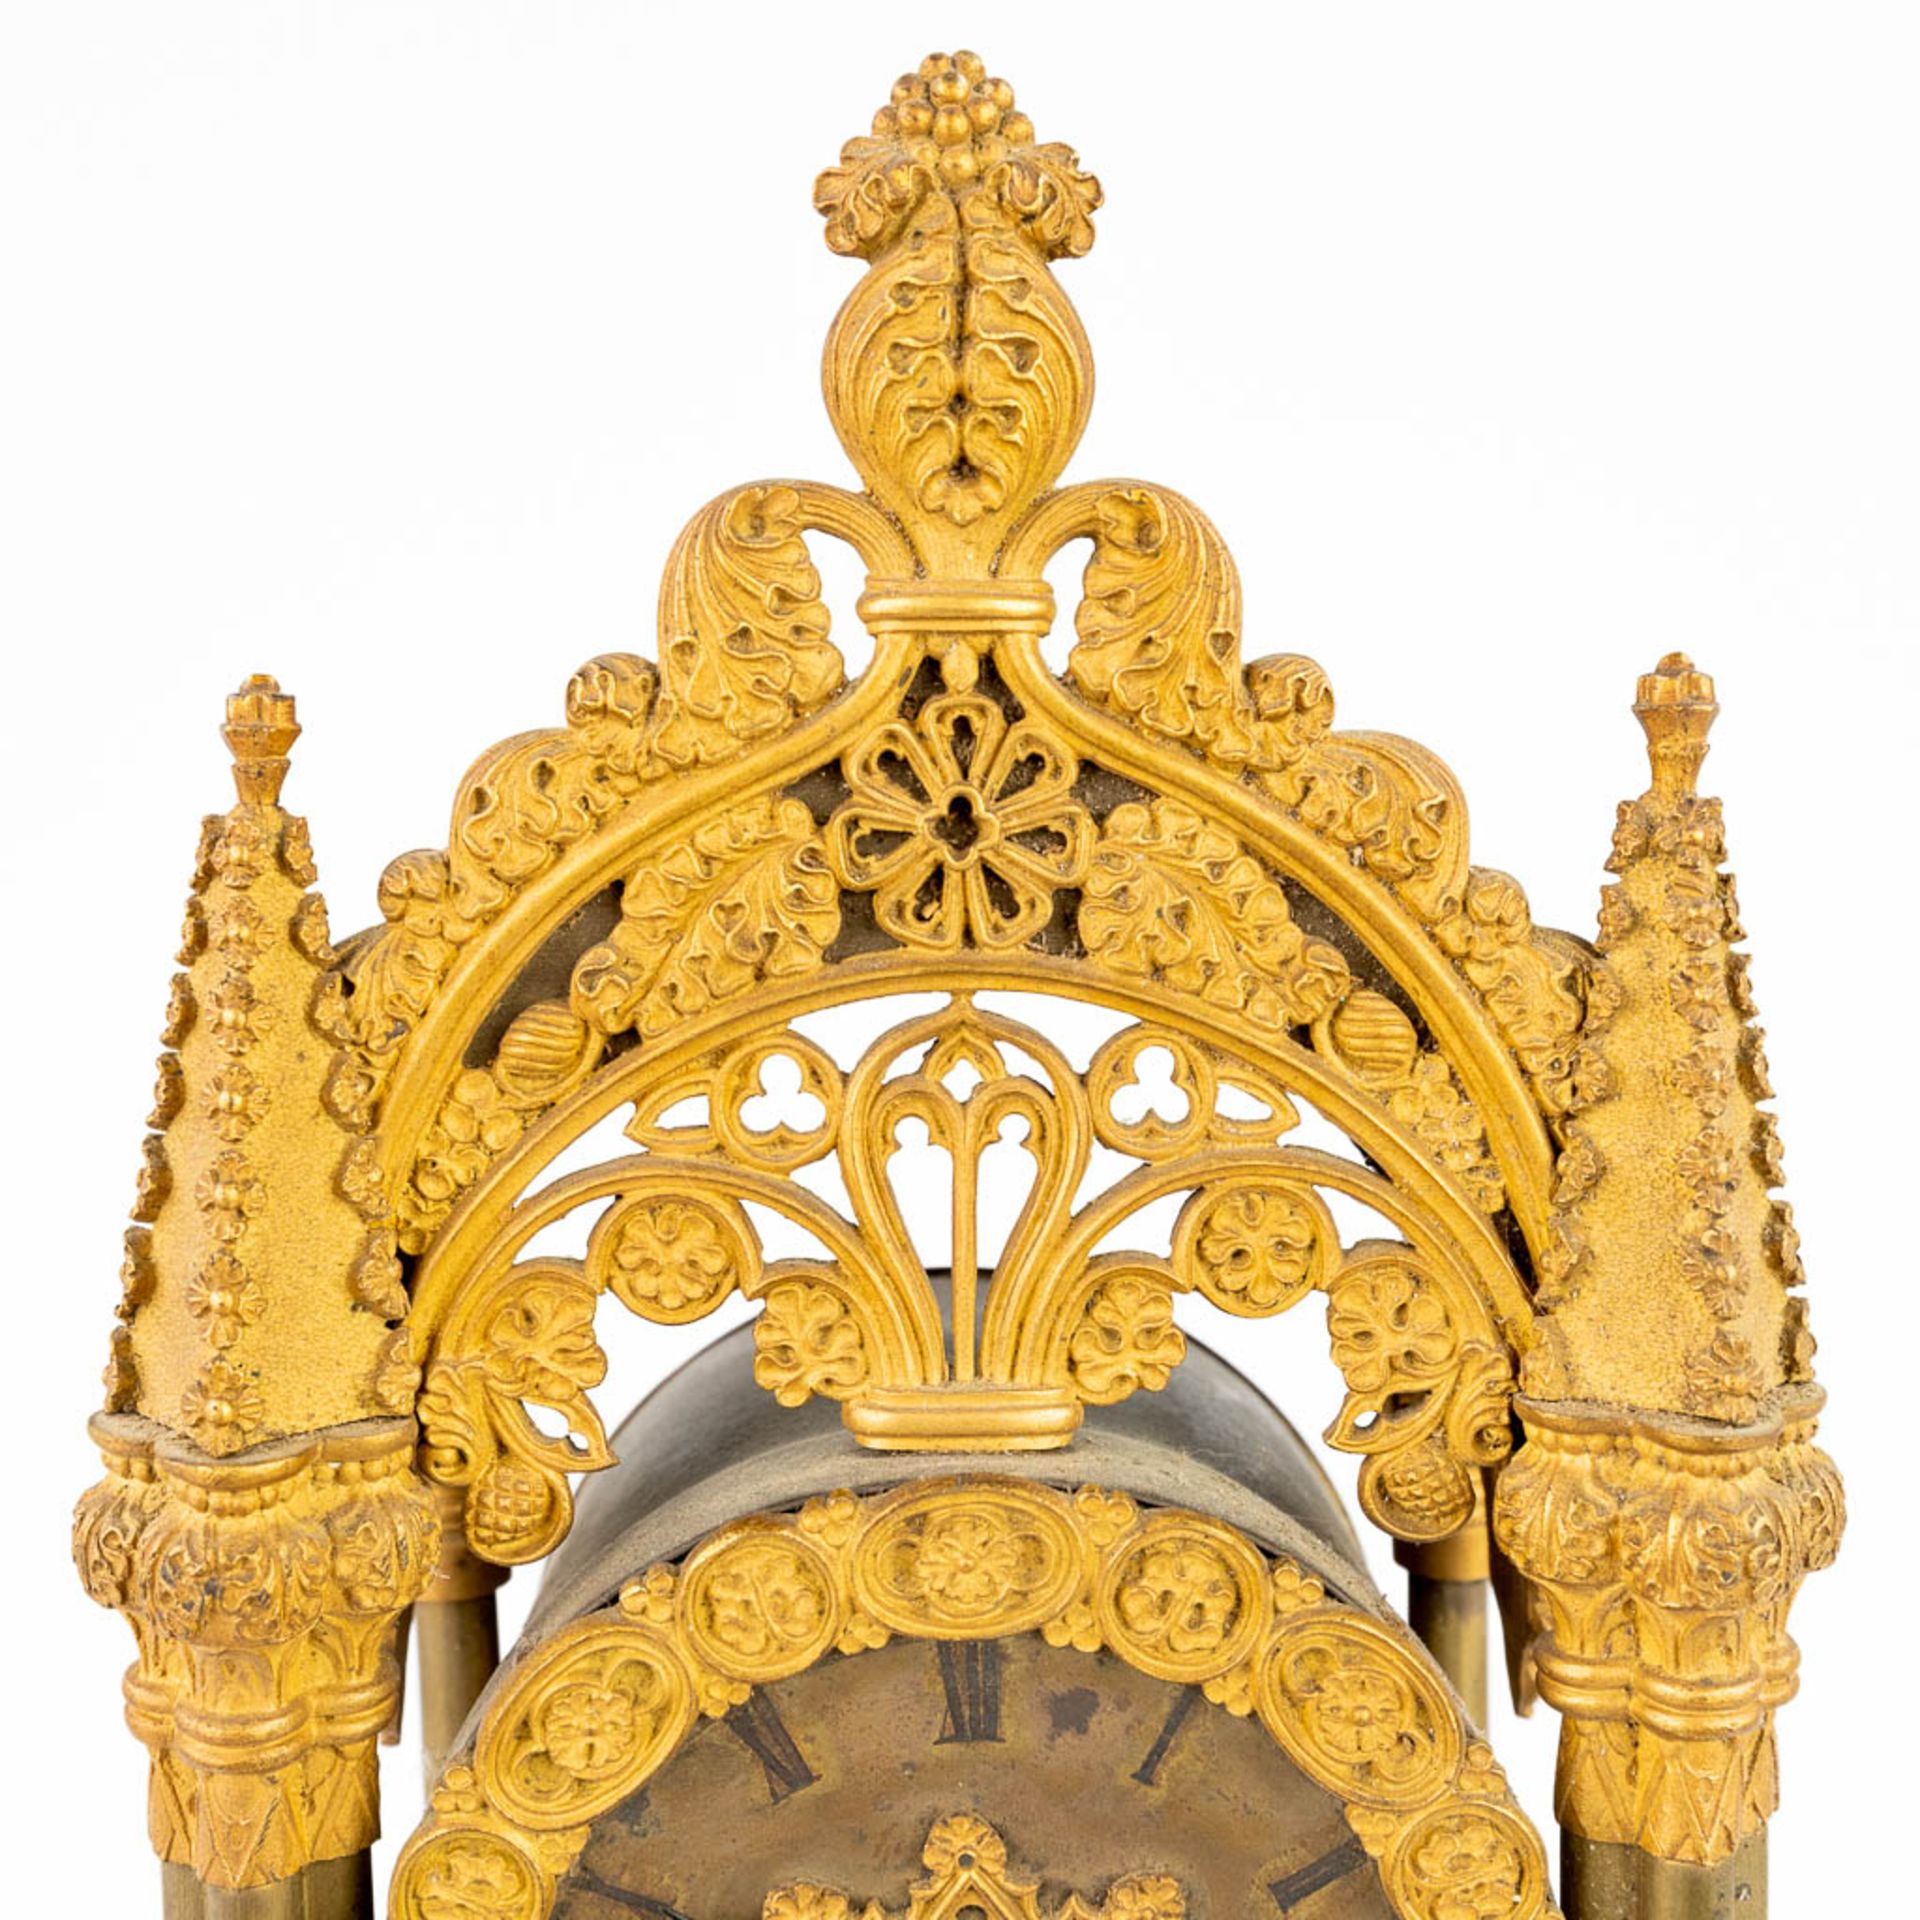 A table column clock made of gilt bronze in a gothic revival style. (11 x 19,5 x 43cm) - Image 7 of 15